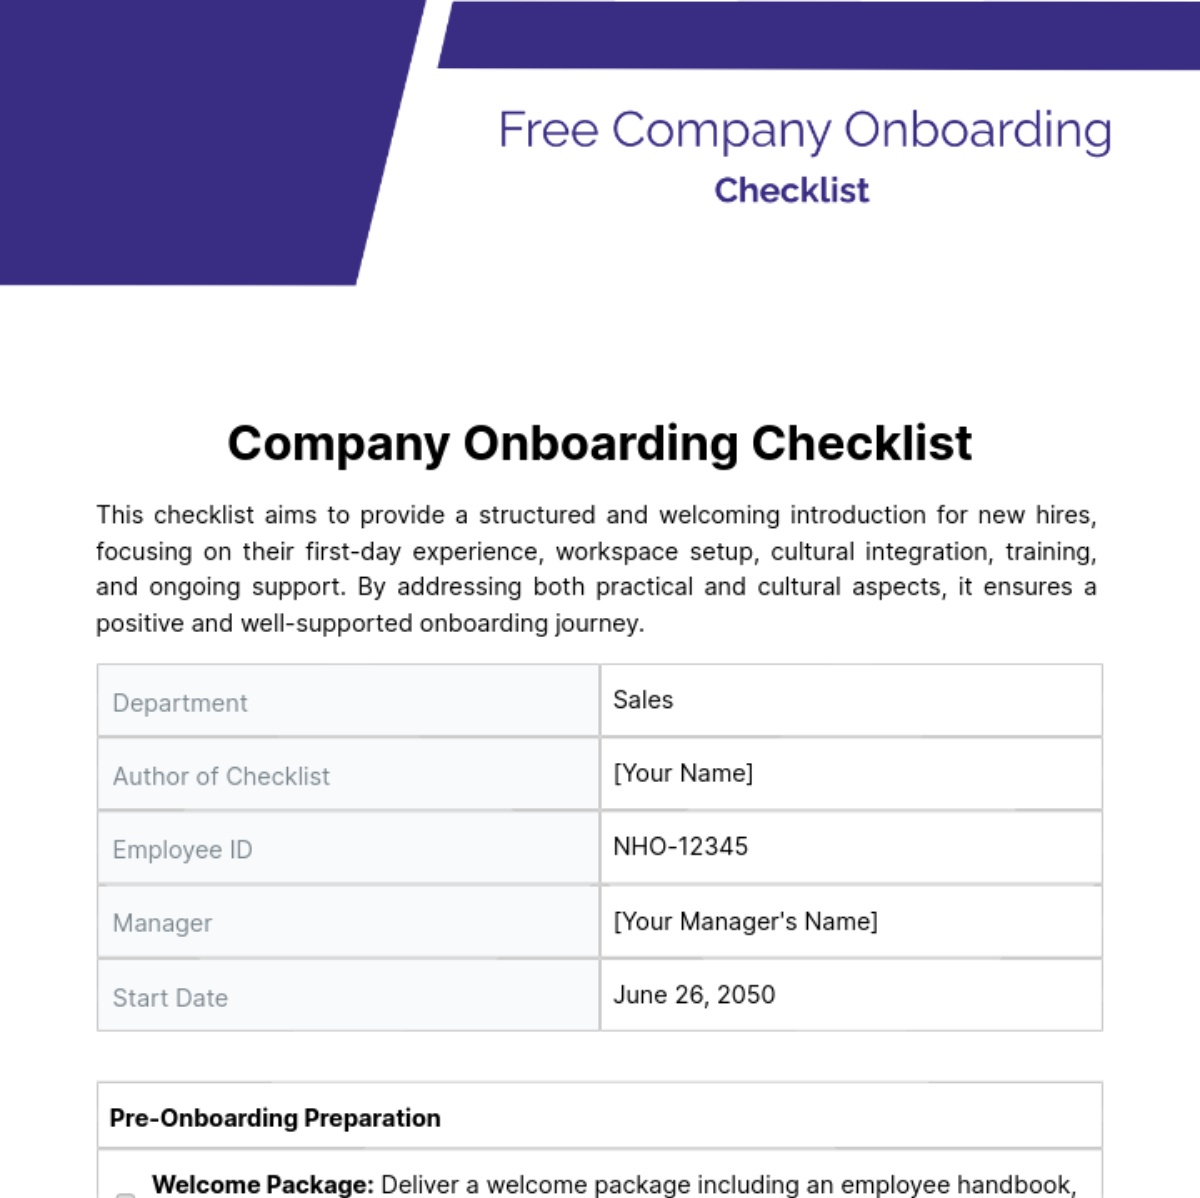 Free Company Onboarding Checklist Template